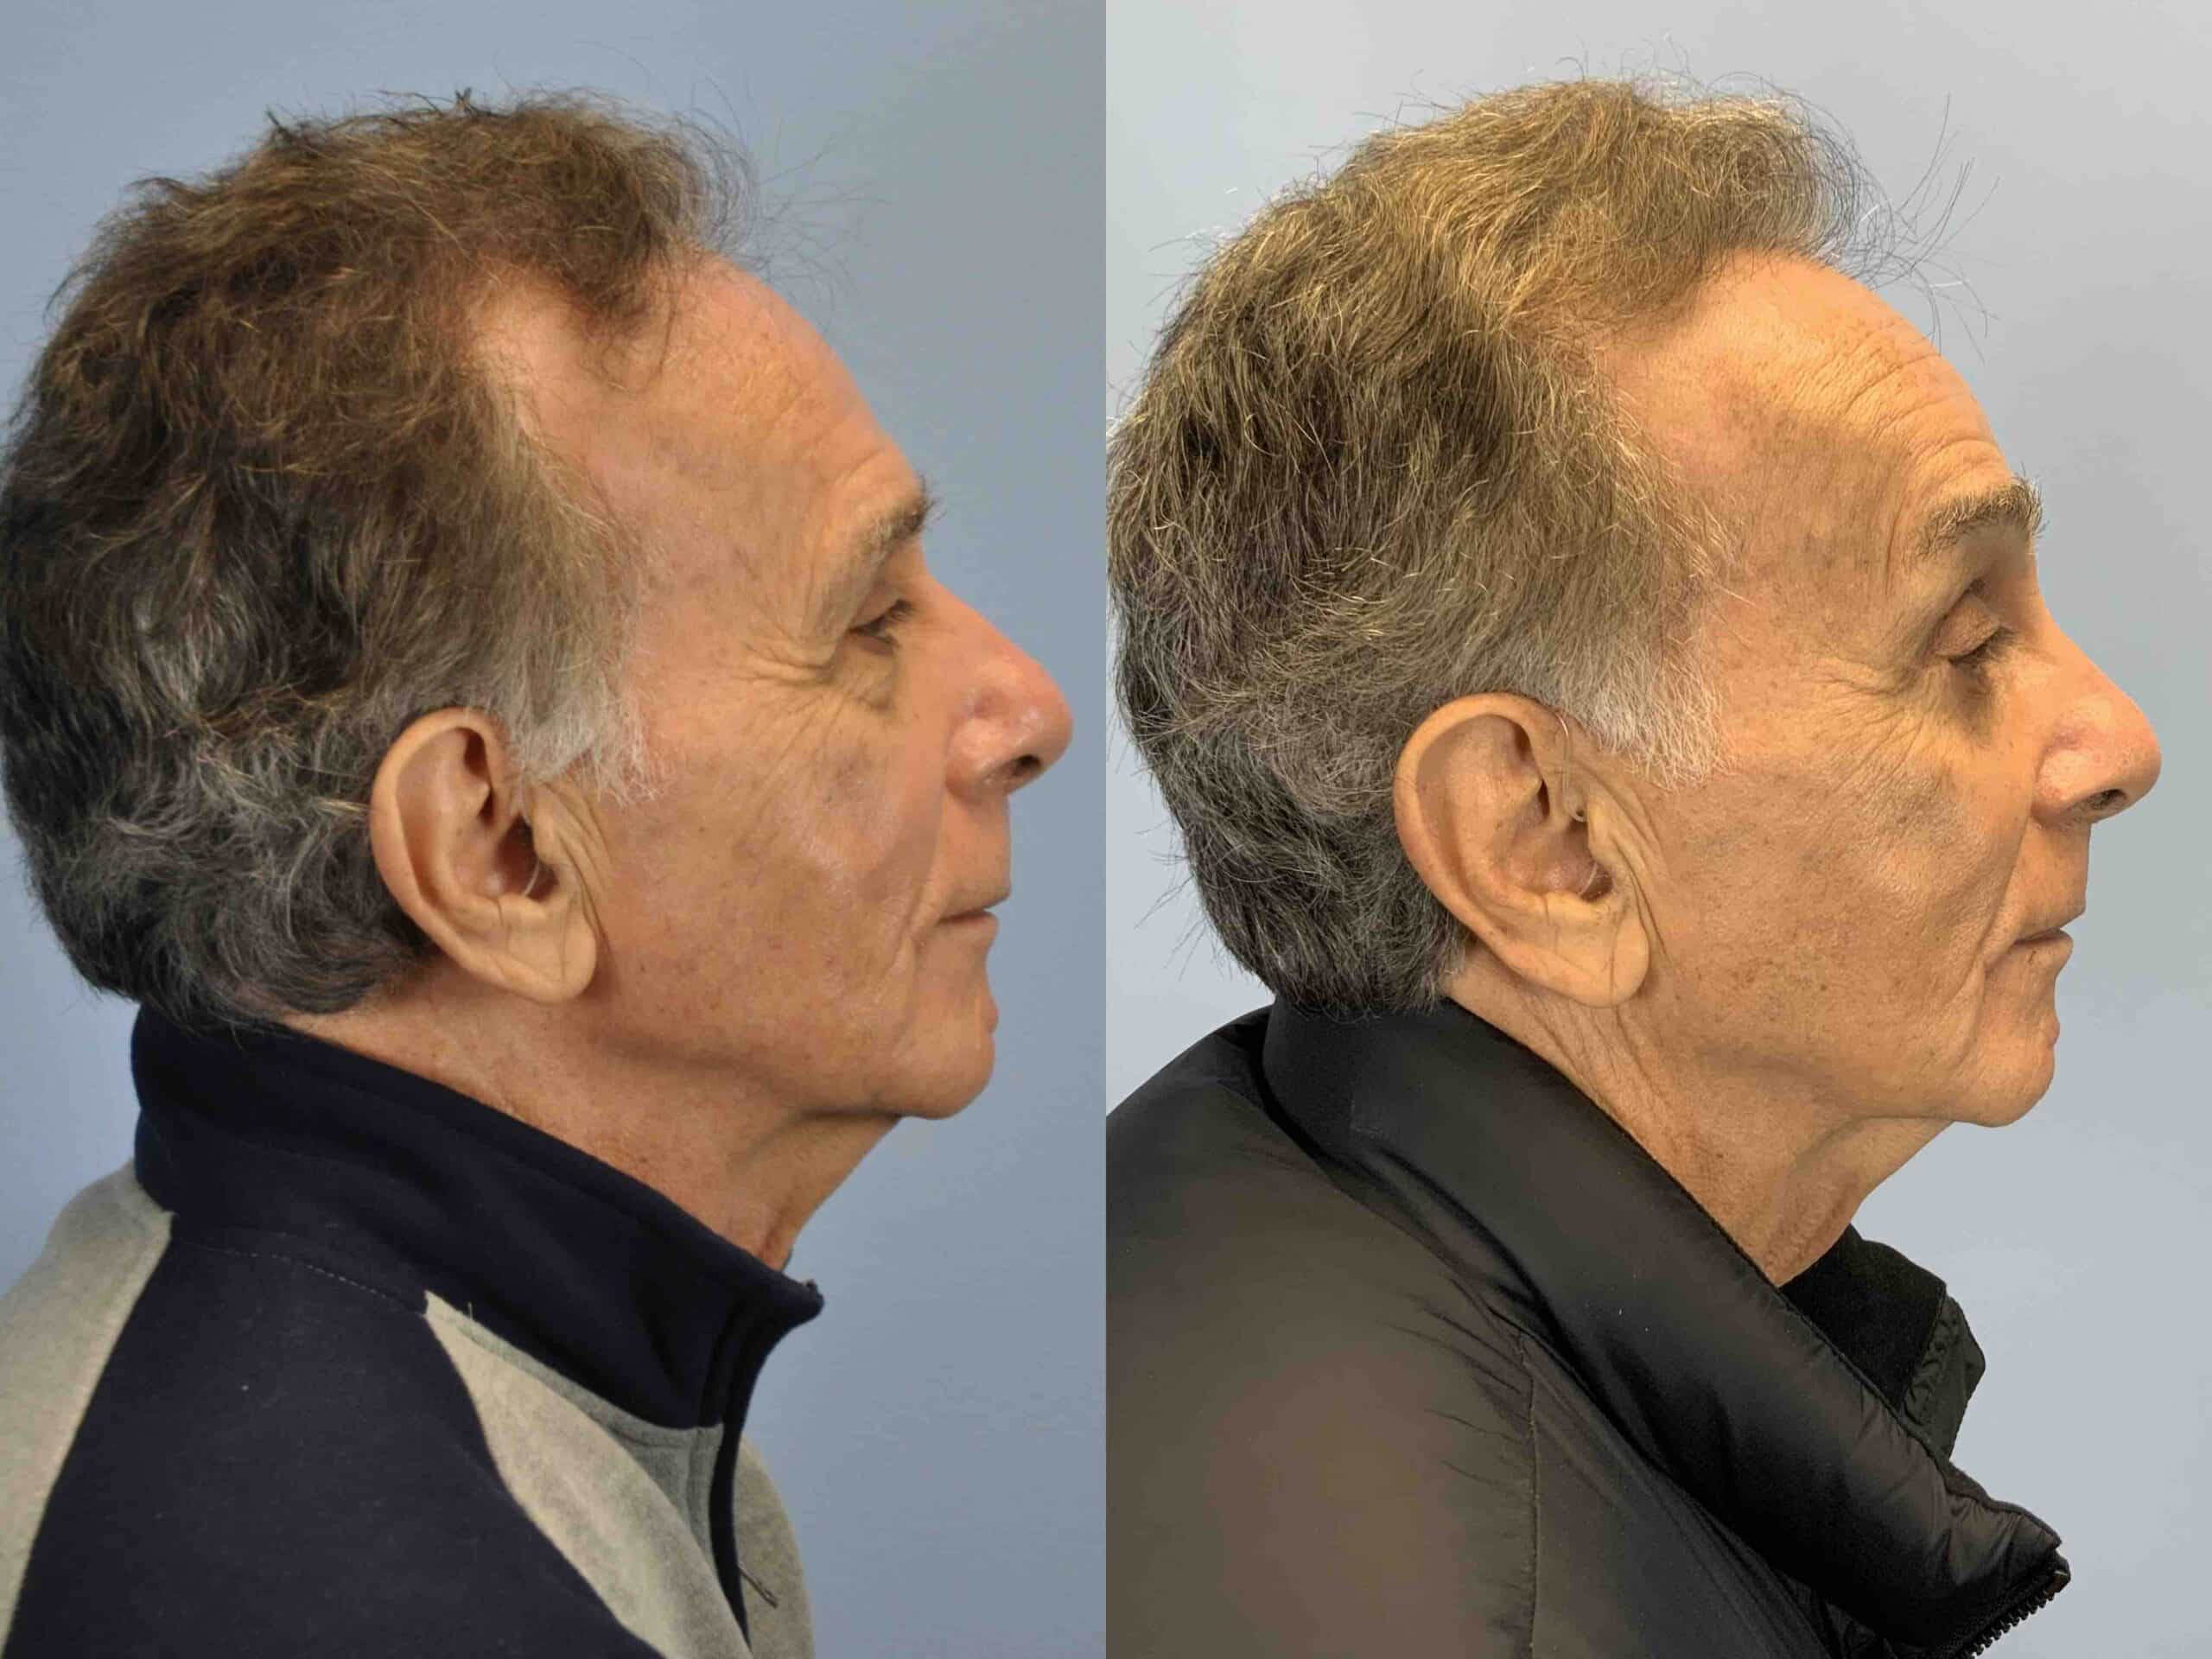 Before and after, 8 mo post op after Upper and Lower Blepharoplasty, Endo Brow Lift performed by Dr. Paul Vanek (side view)